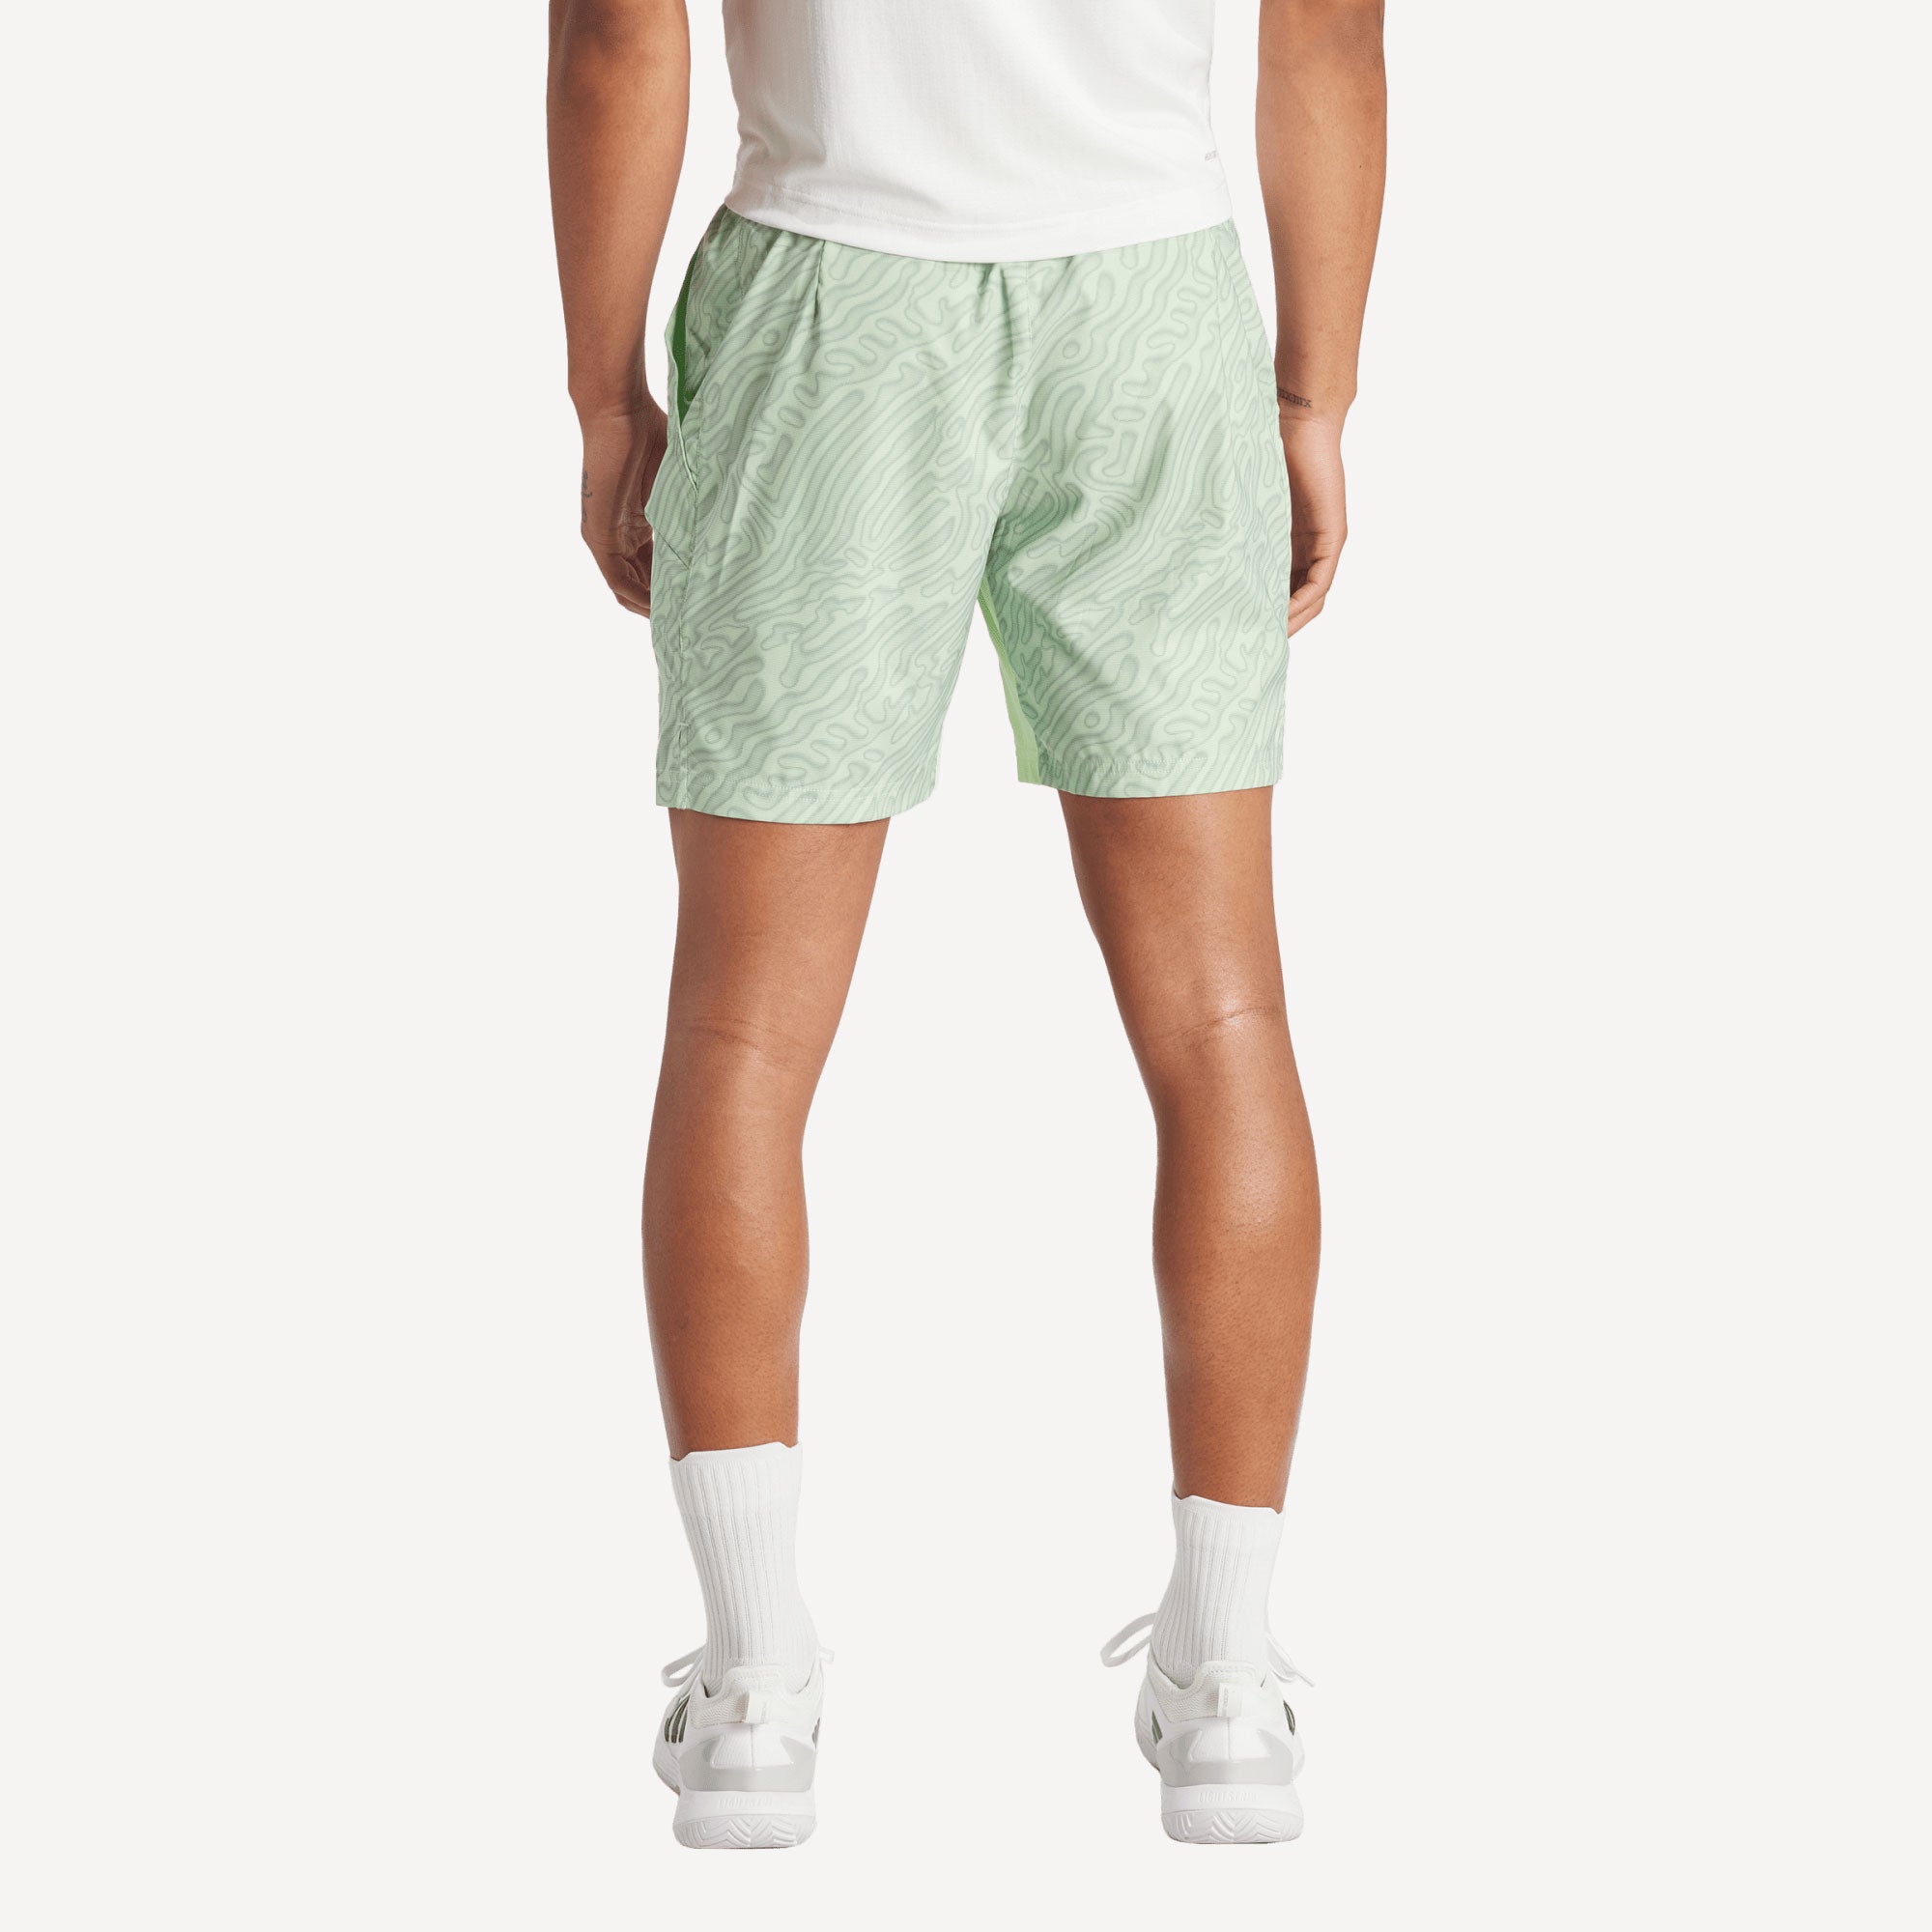 adidas Pro Melbourne Men's Printed 7-Inch Tennis Shorts - Green (2)